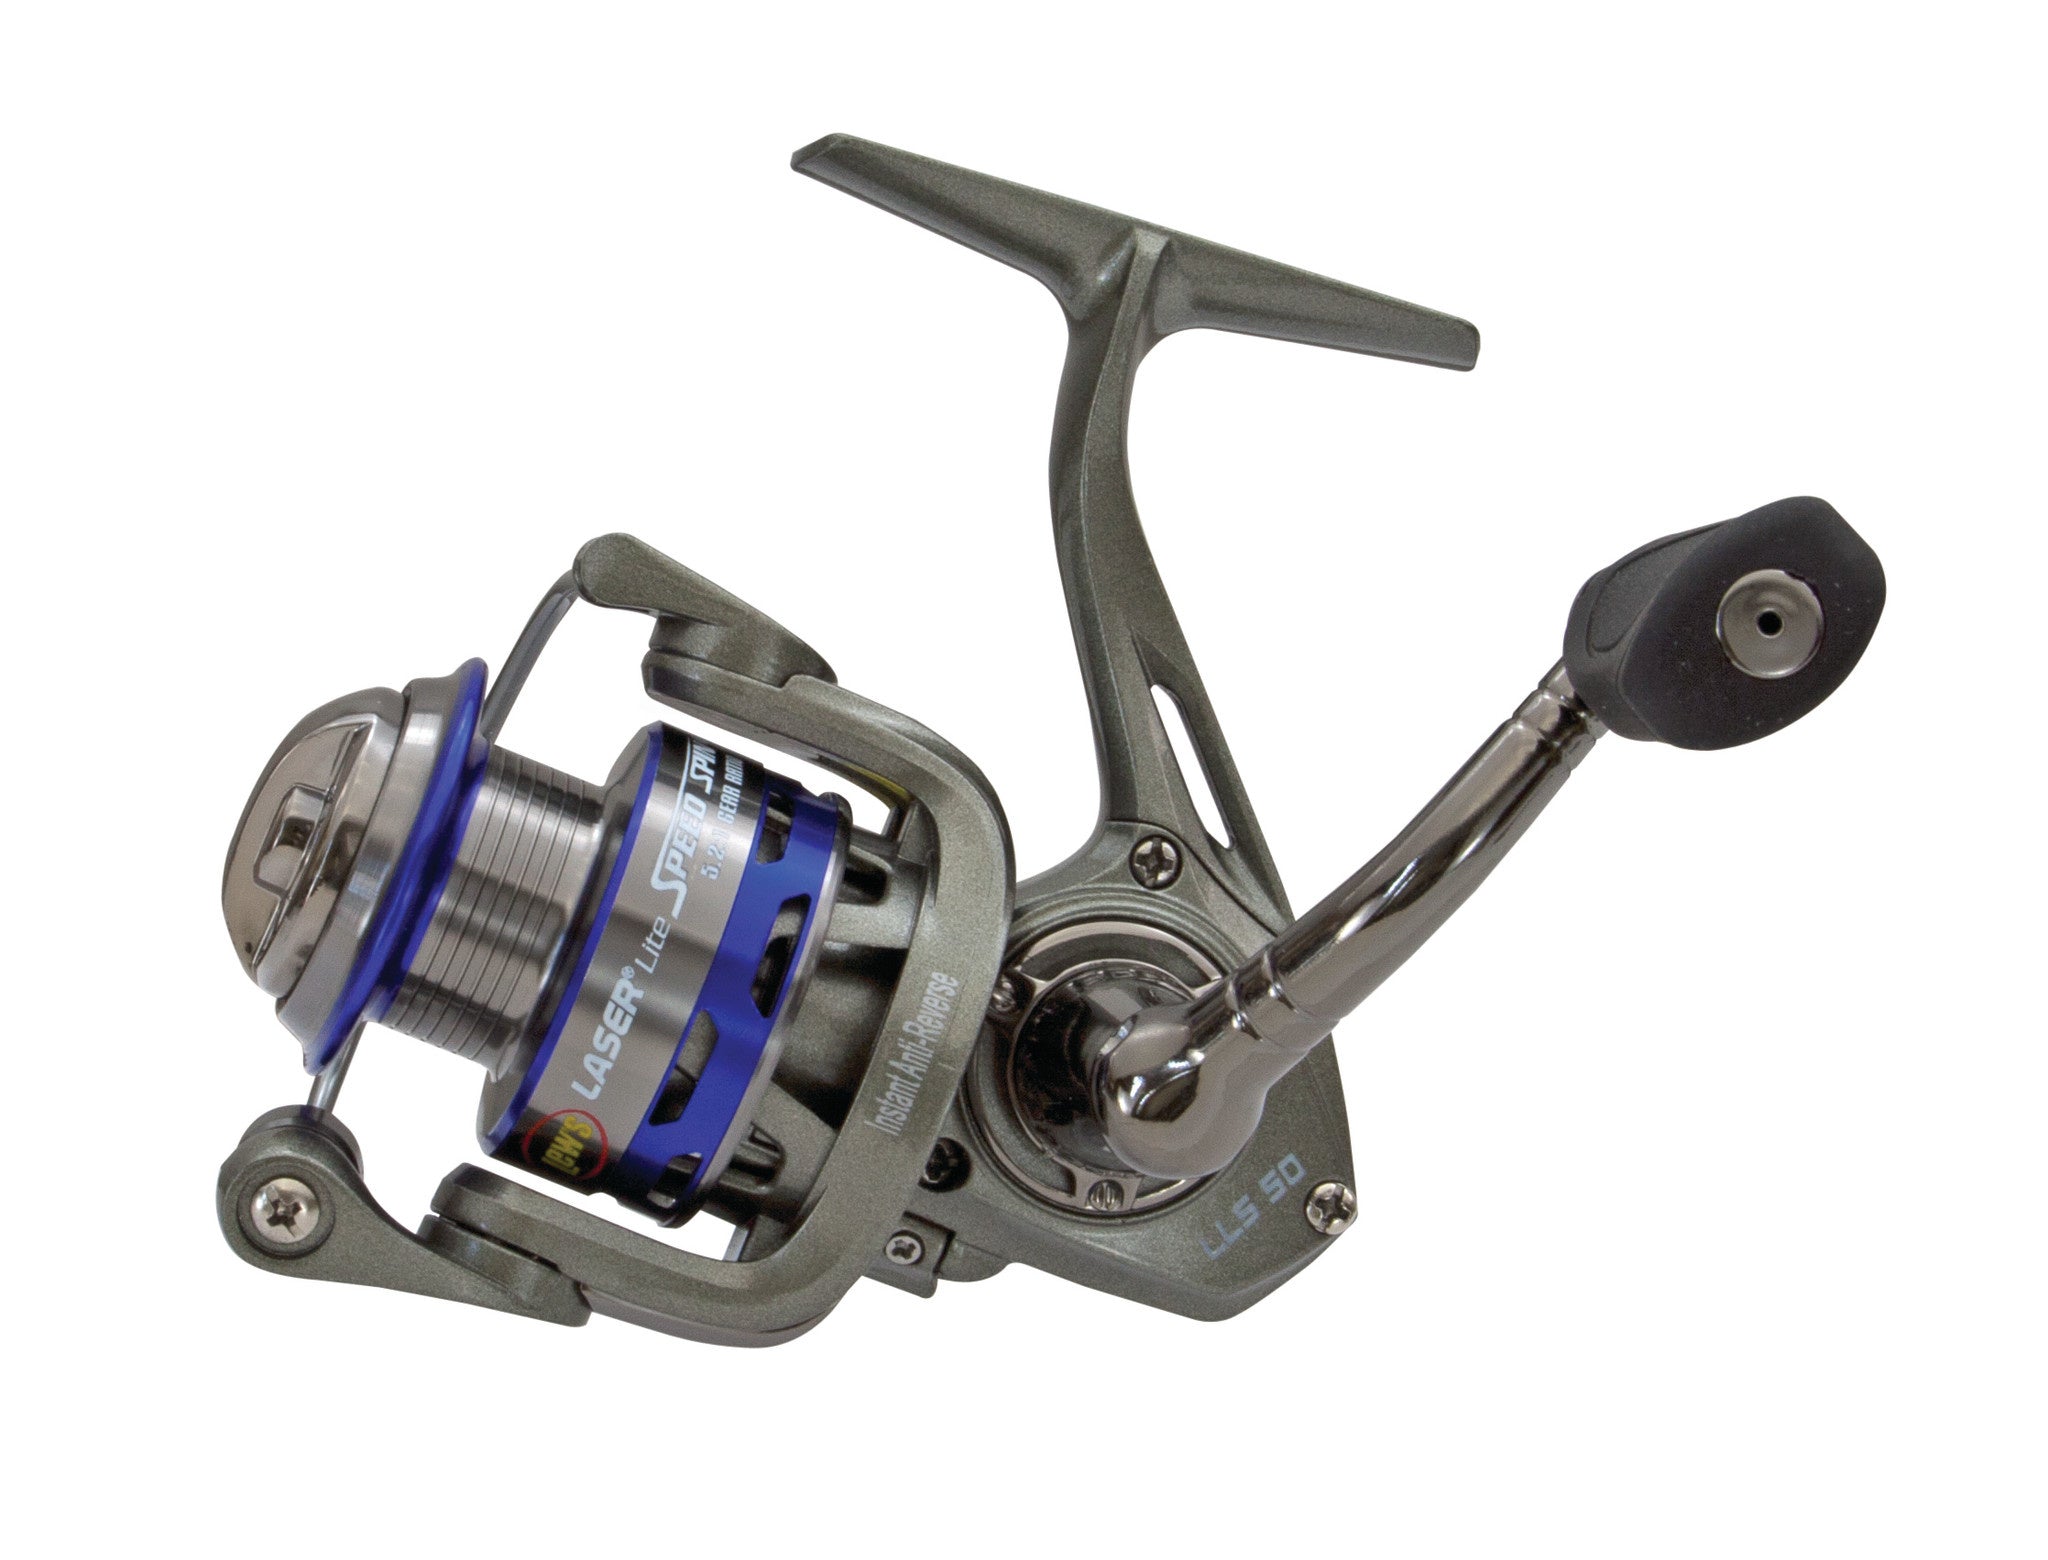 Brand new Lew's Mach Crush Spinning Reel for Sale in Mukilteo